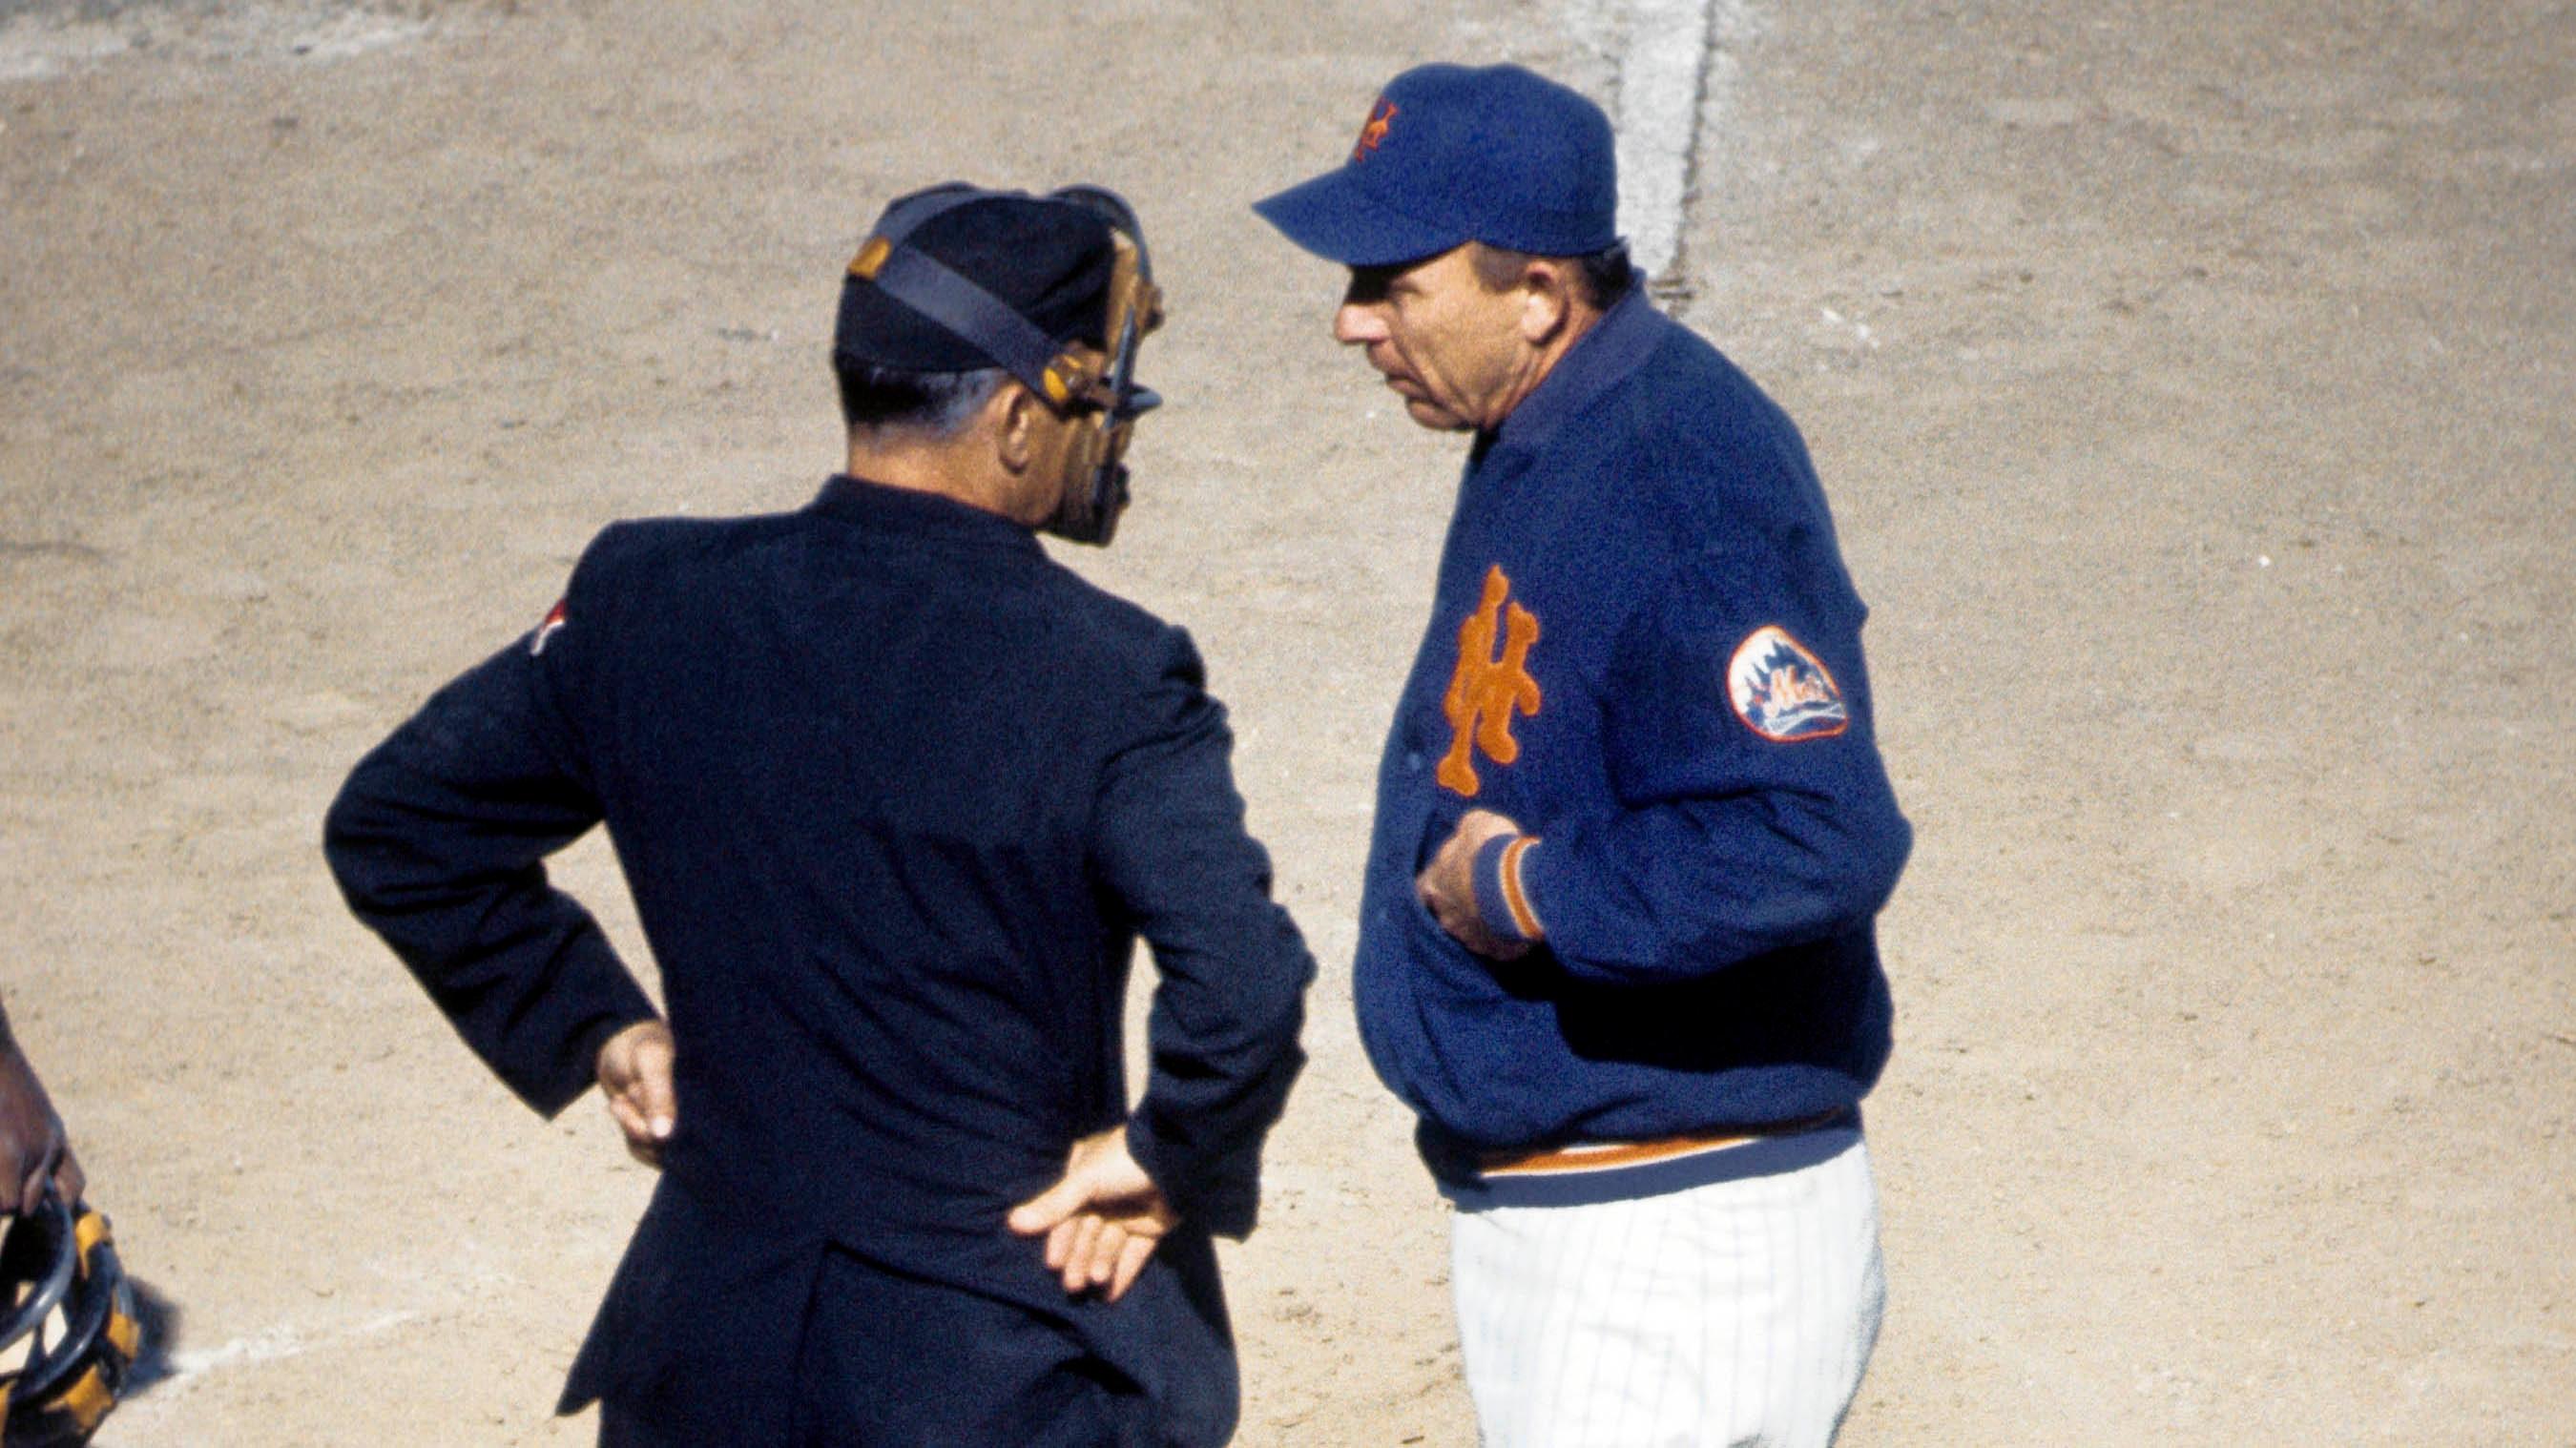 Oct 15, 1969; Flushing, NY, USA; FILE PHOTO; New York Mets manager Gil Hodges (right) talks with NL umpire Shag Crawford (left) against the Baltimore Orioles during game 4 of the 1969 World Series at Shea Stadium. The Mets defeated the Orioles 2-1 in 10 innings. / Dick Raphael-USA TODAY Sports